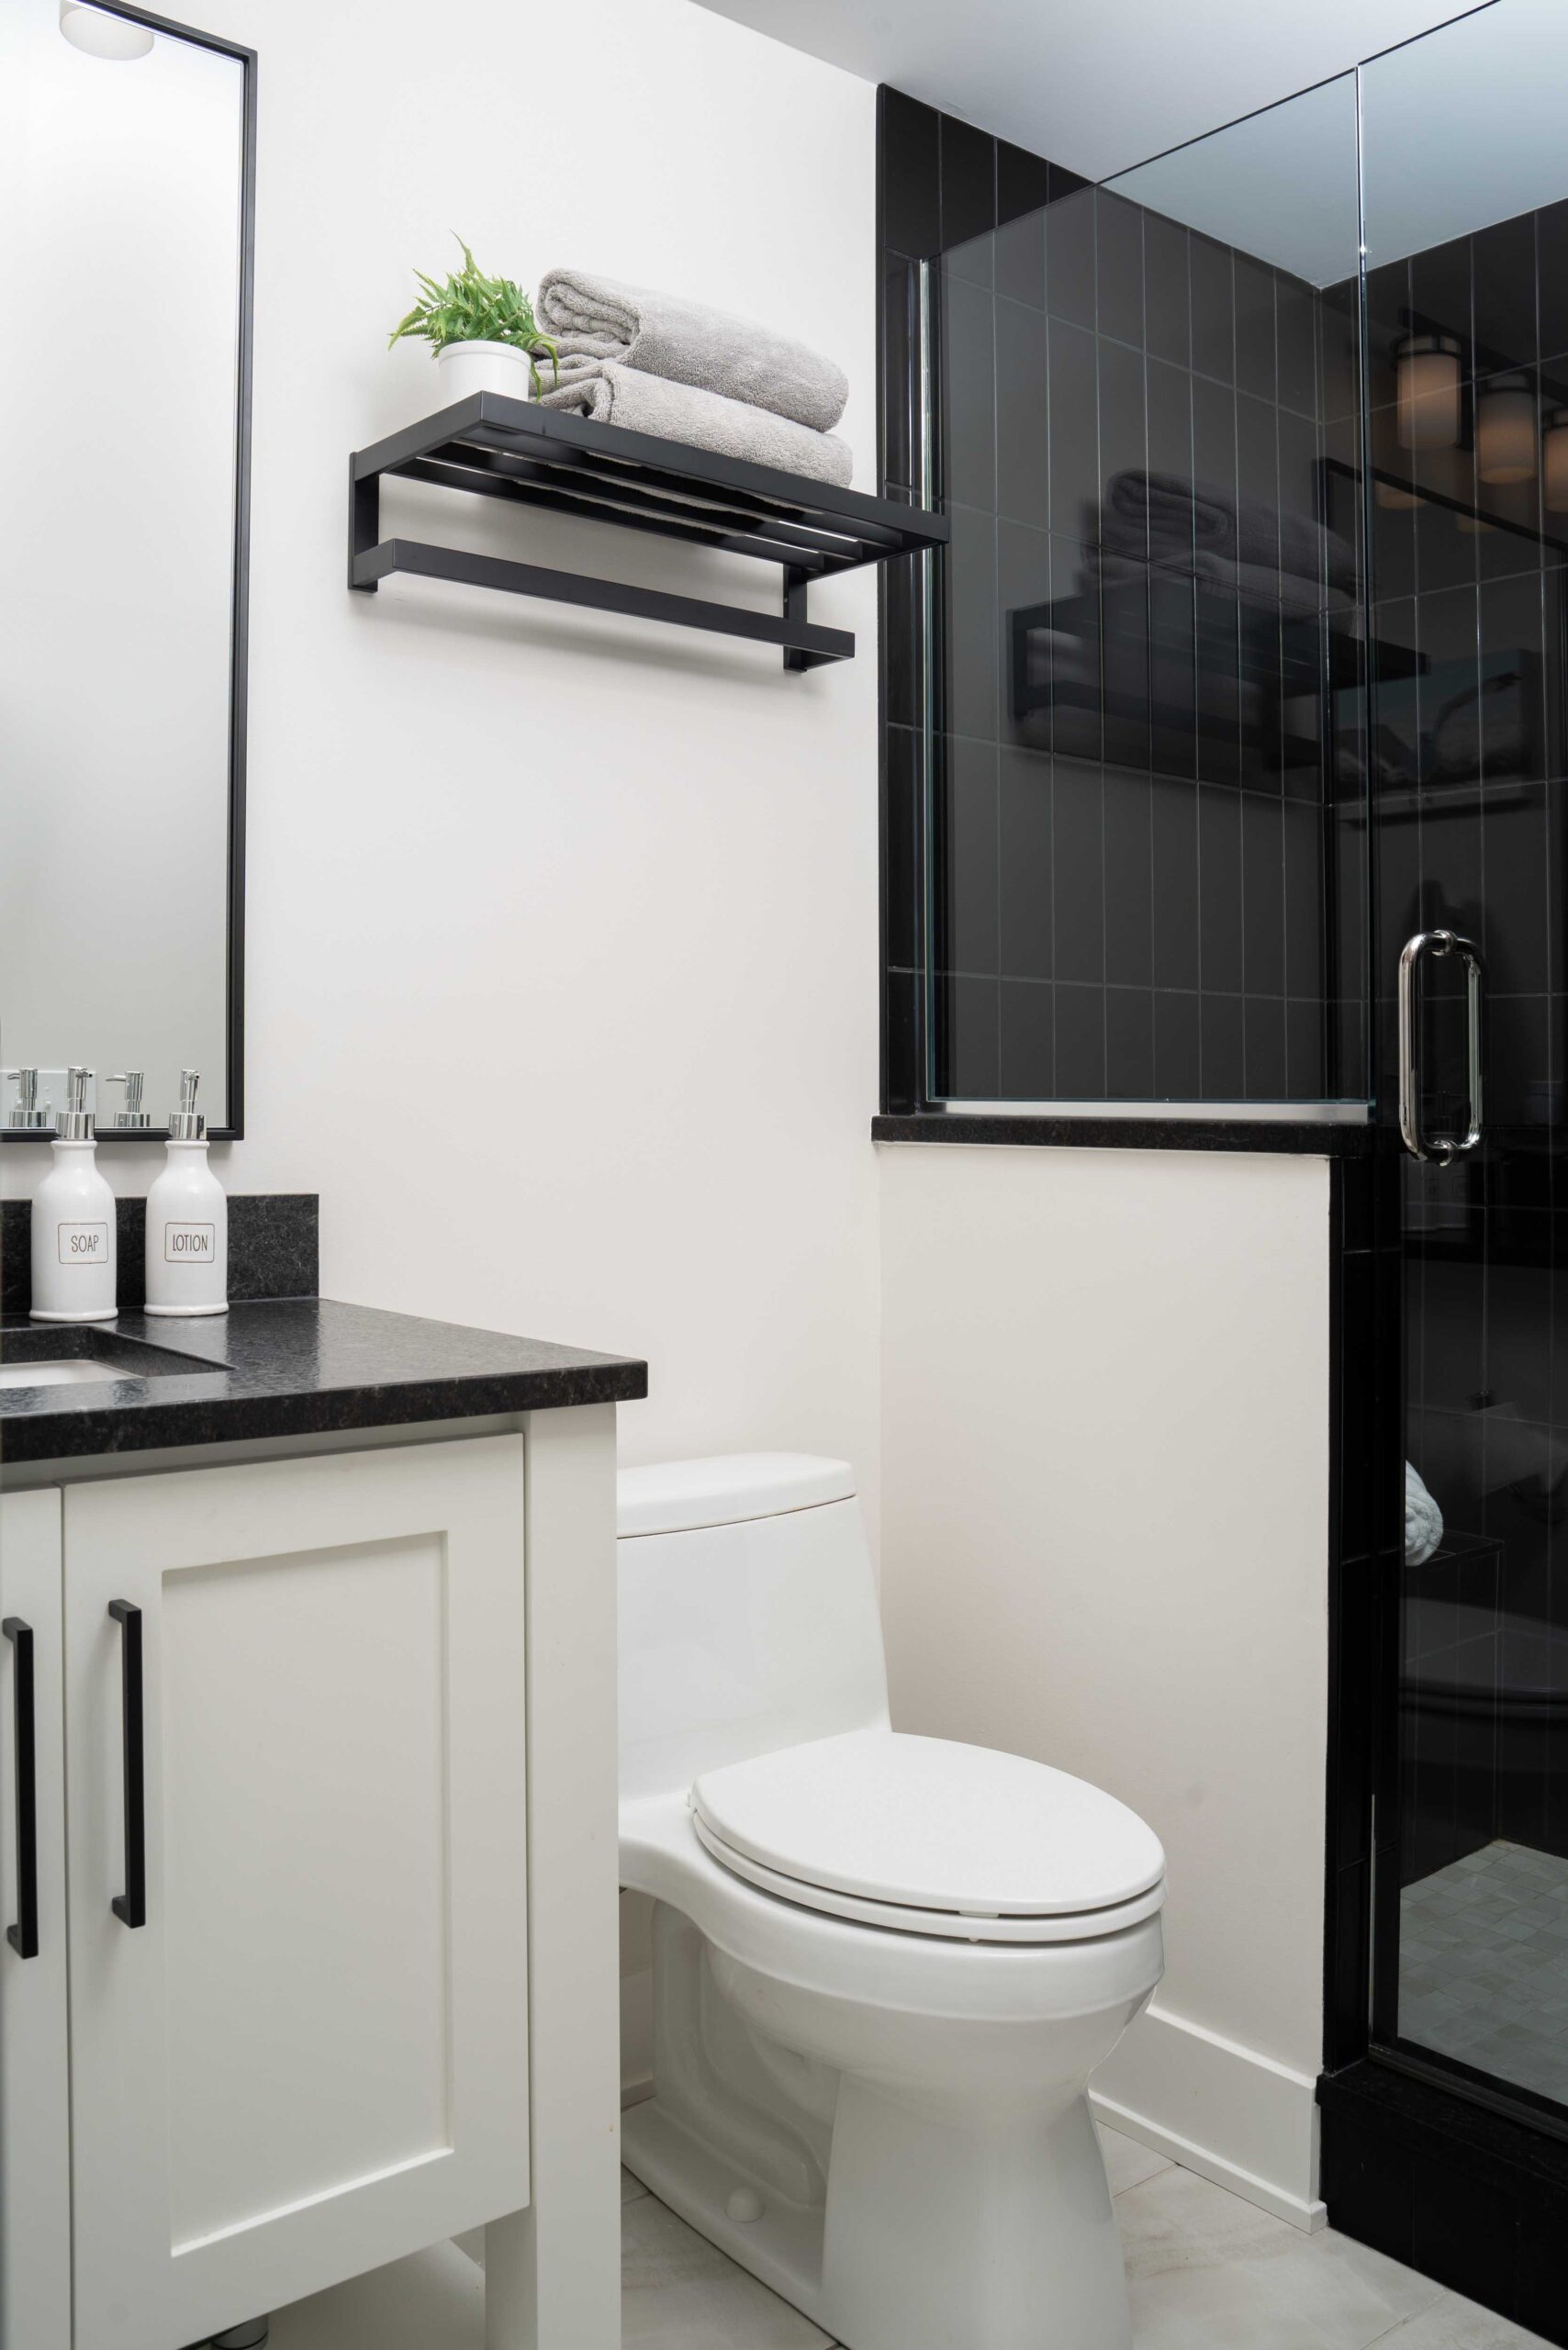 An Orchard Lake Remodel featuring a black and white bathroom with a toilet and shower.